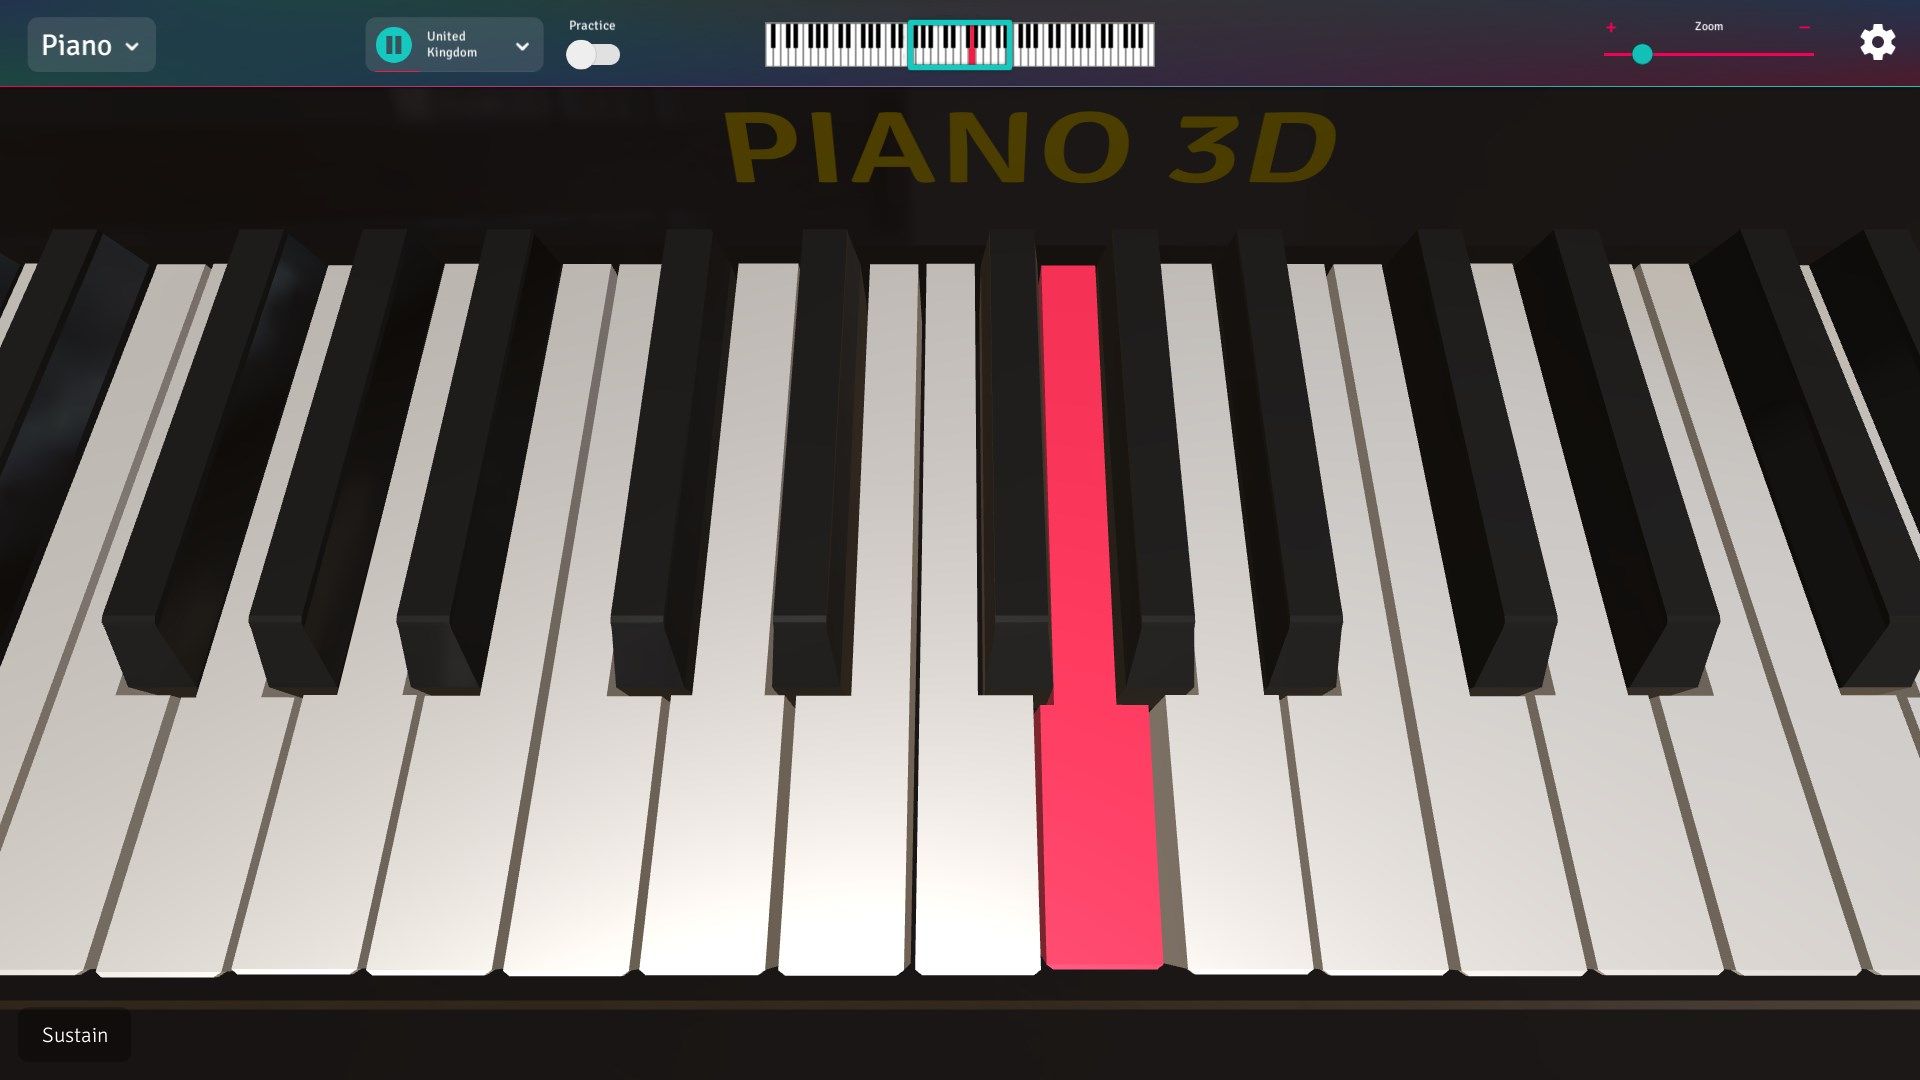 Each tutorial highlights the keys you need to press, so that you can play piano in no time!